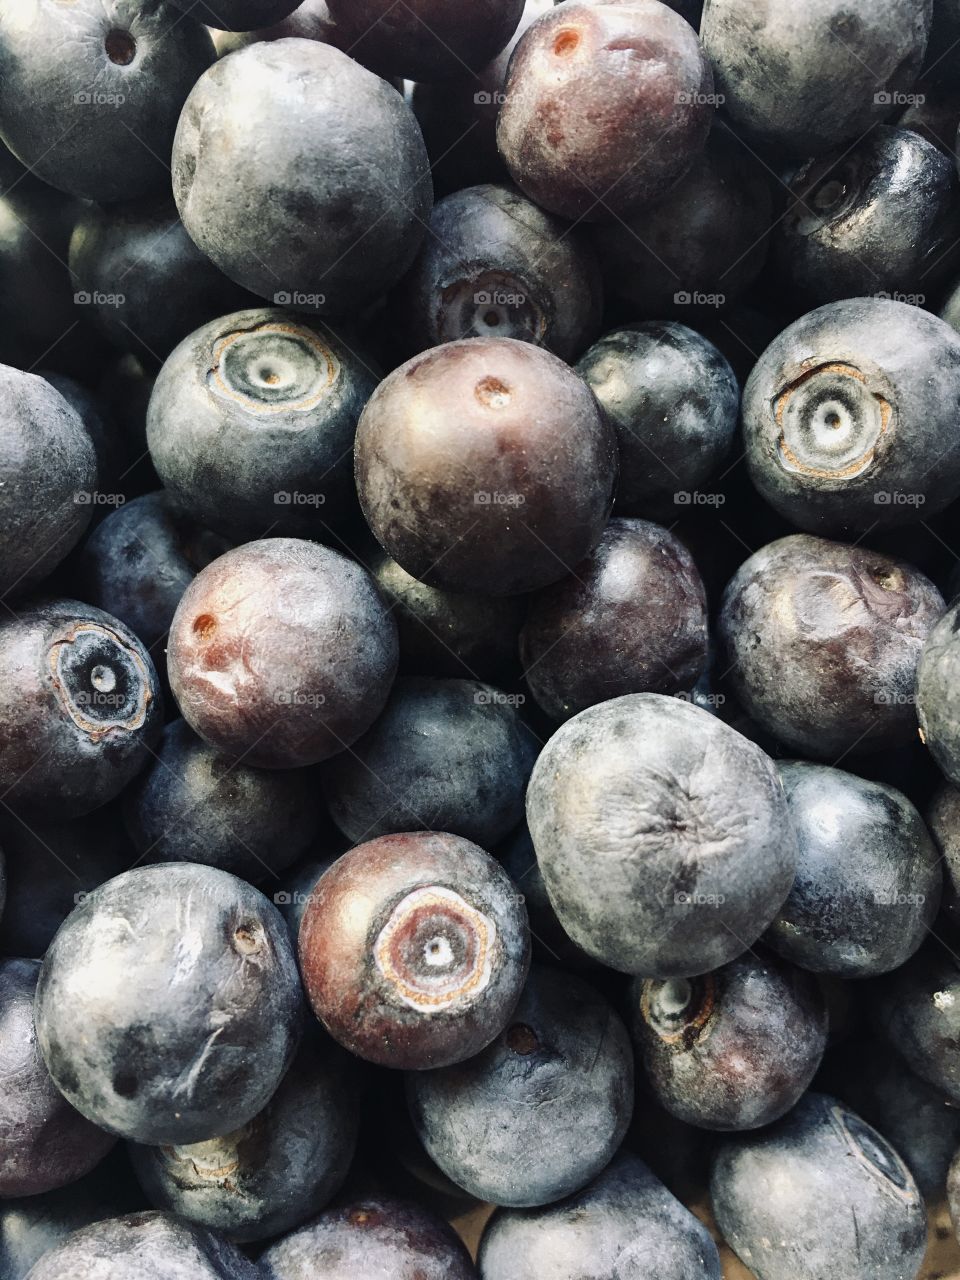 Fresh blueberries from a local street market in Portugal. 